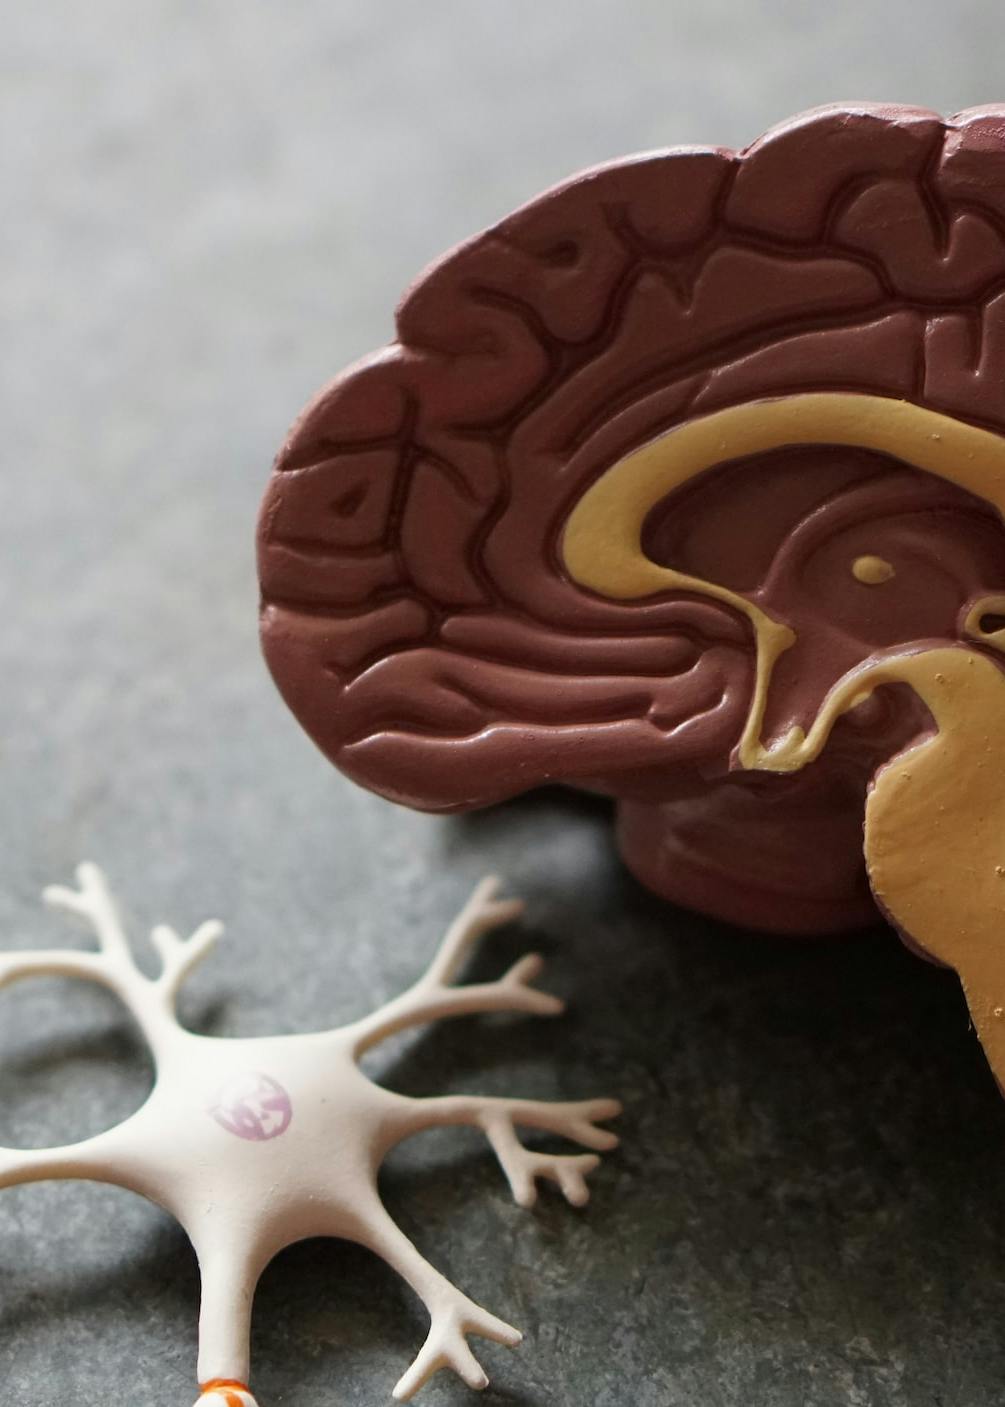 Plastic model of an open brain along its midsection.